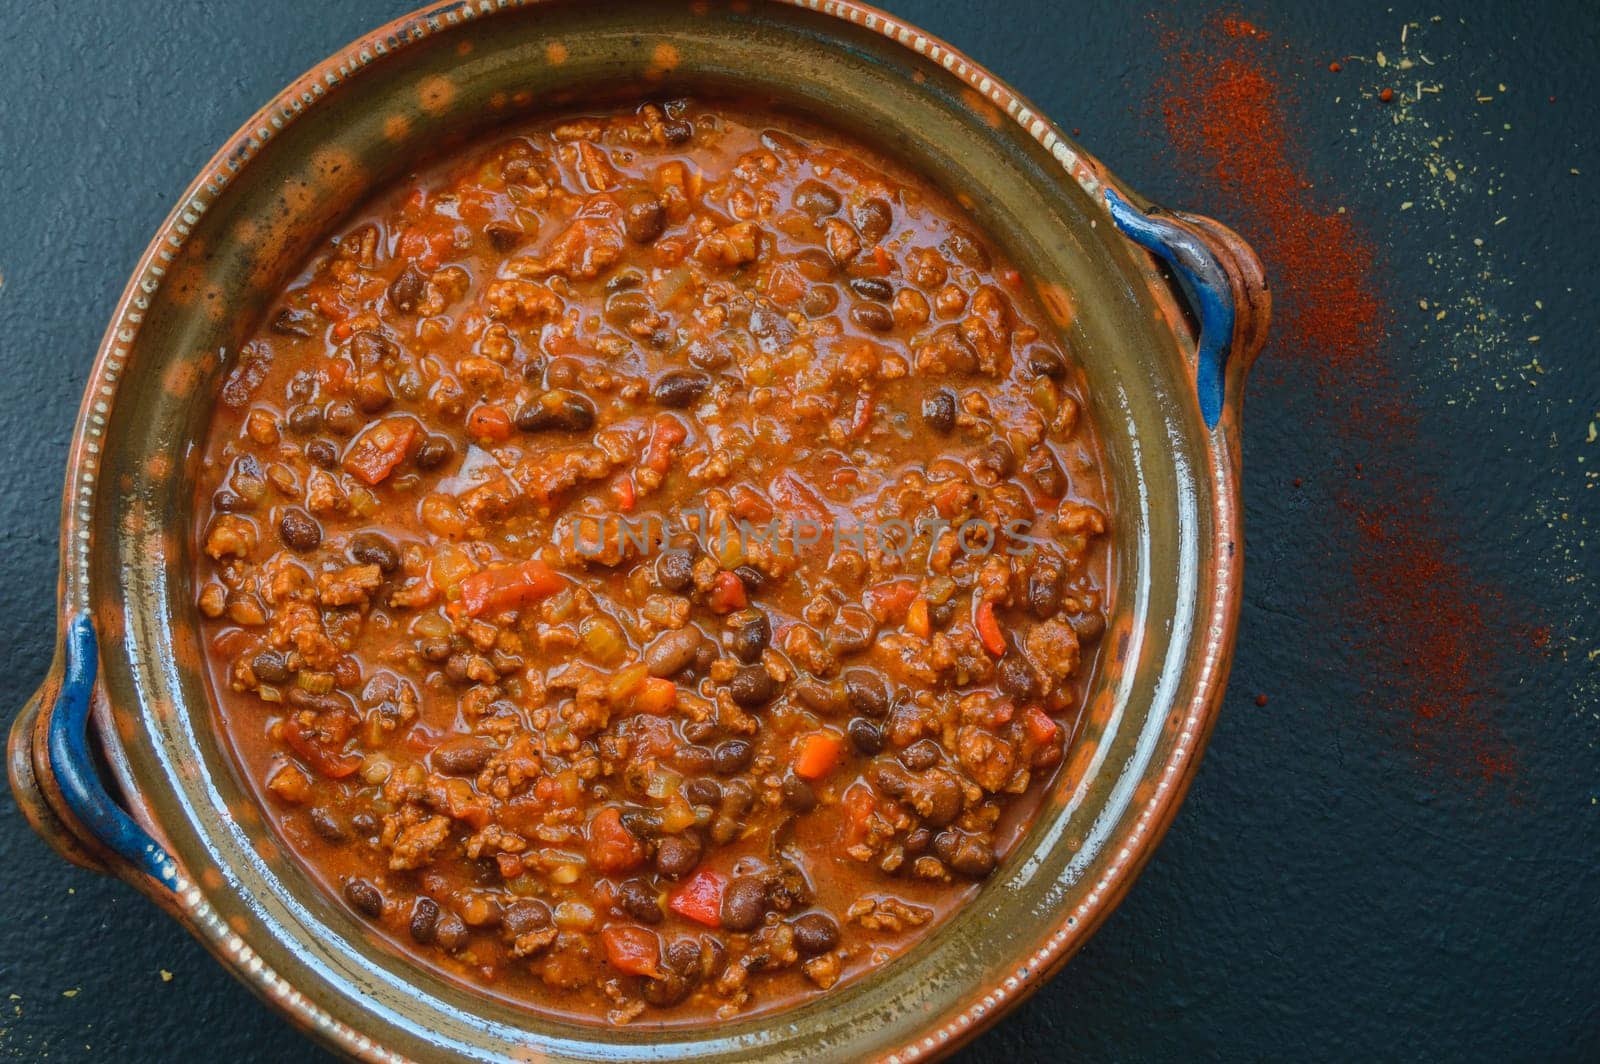 Black Bean Beef Chili Con Carne in Large Clay Pot by RobertPB